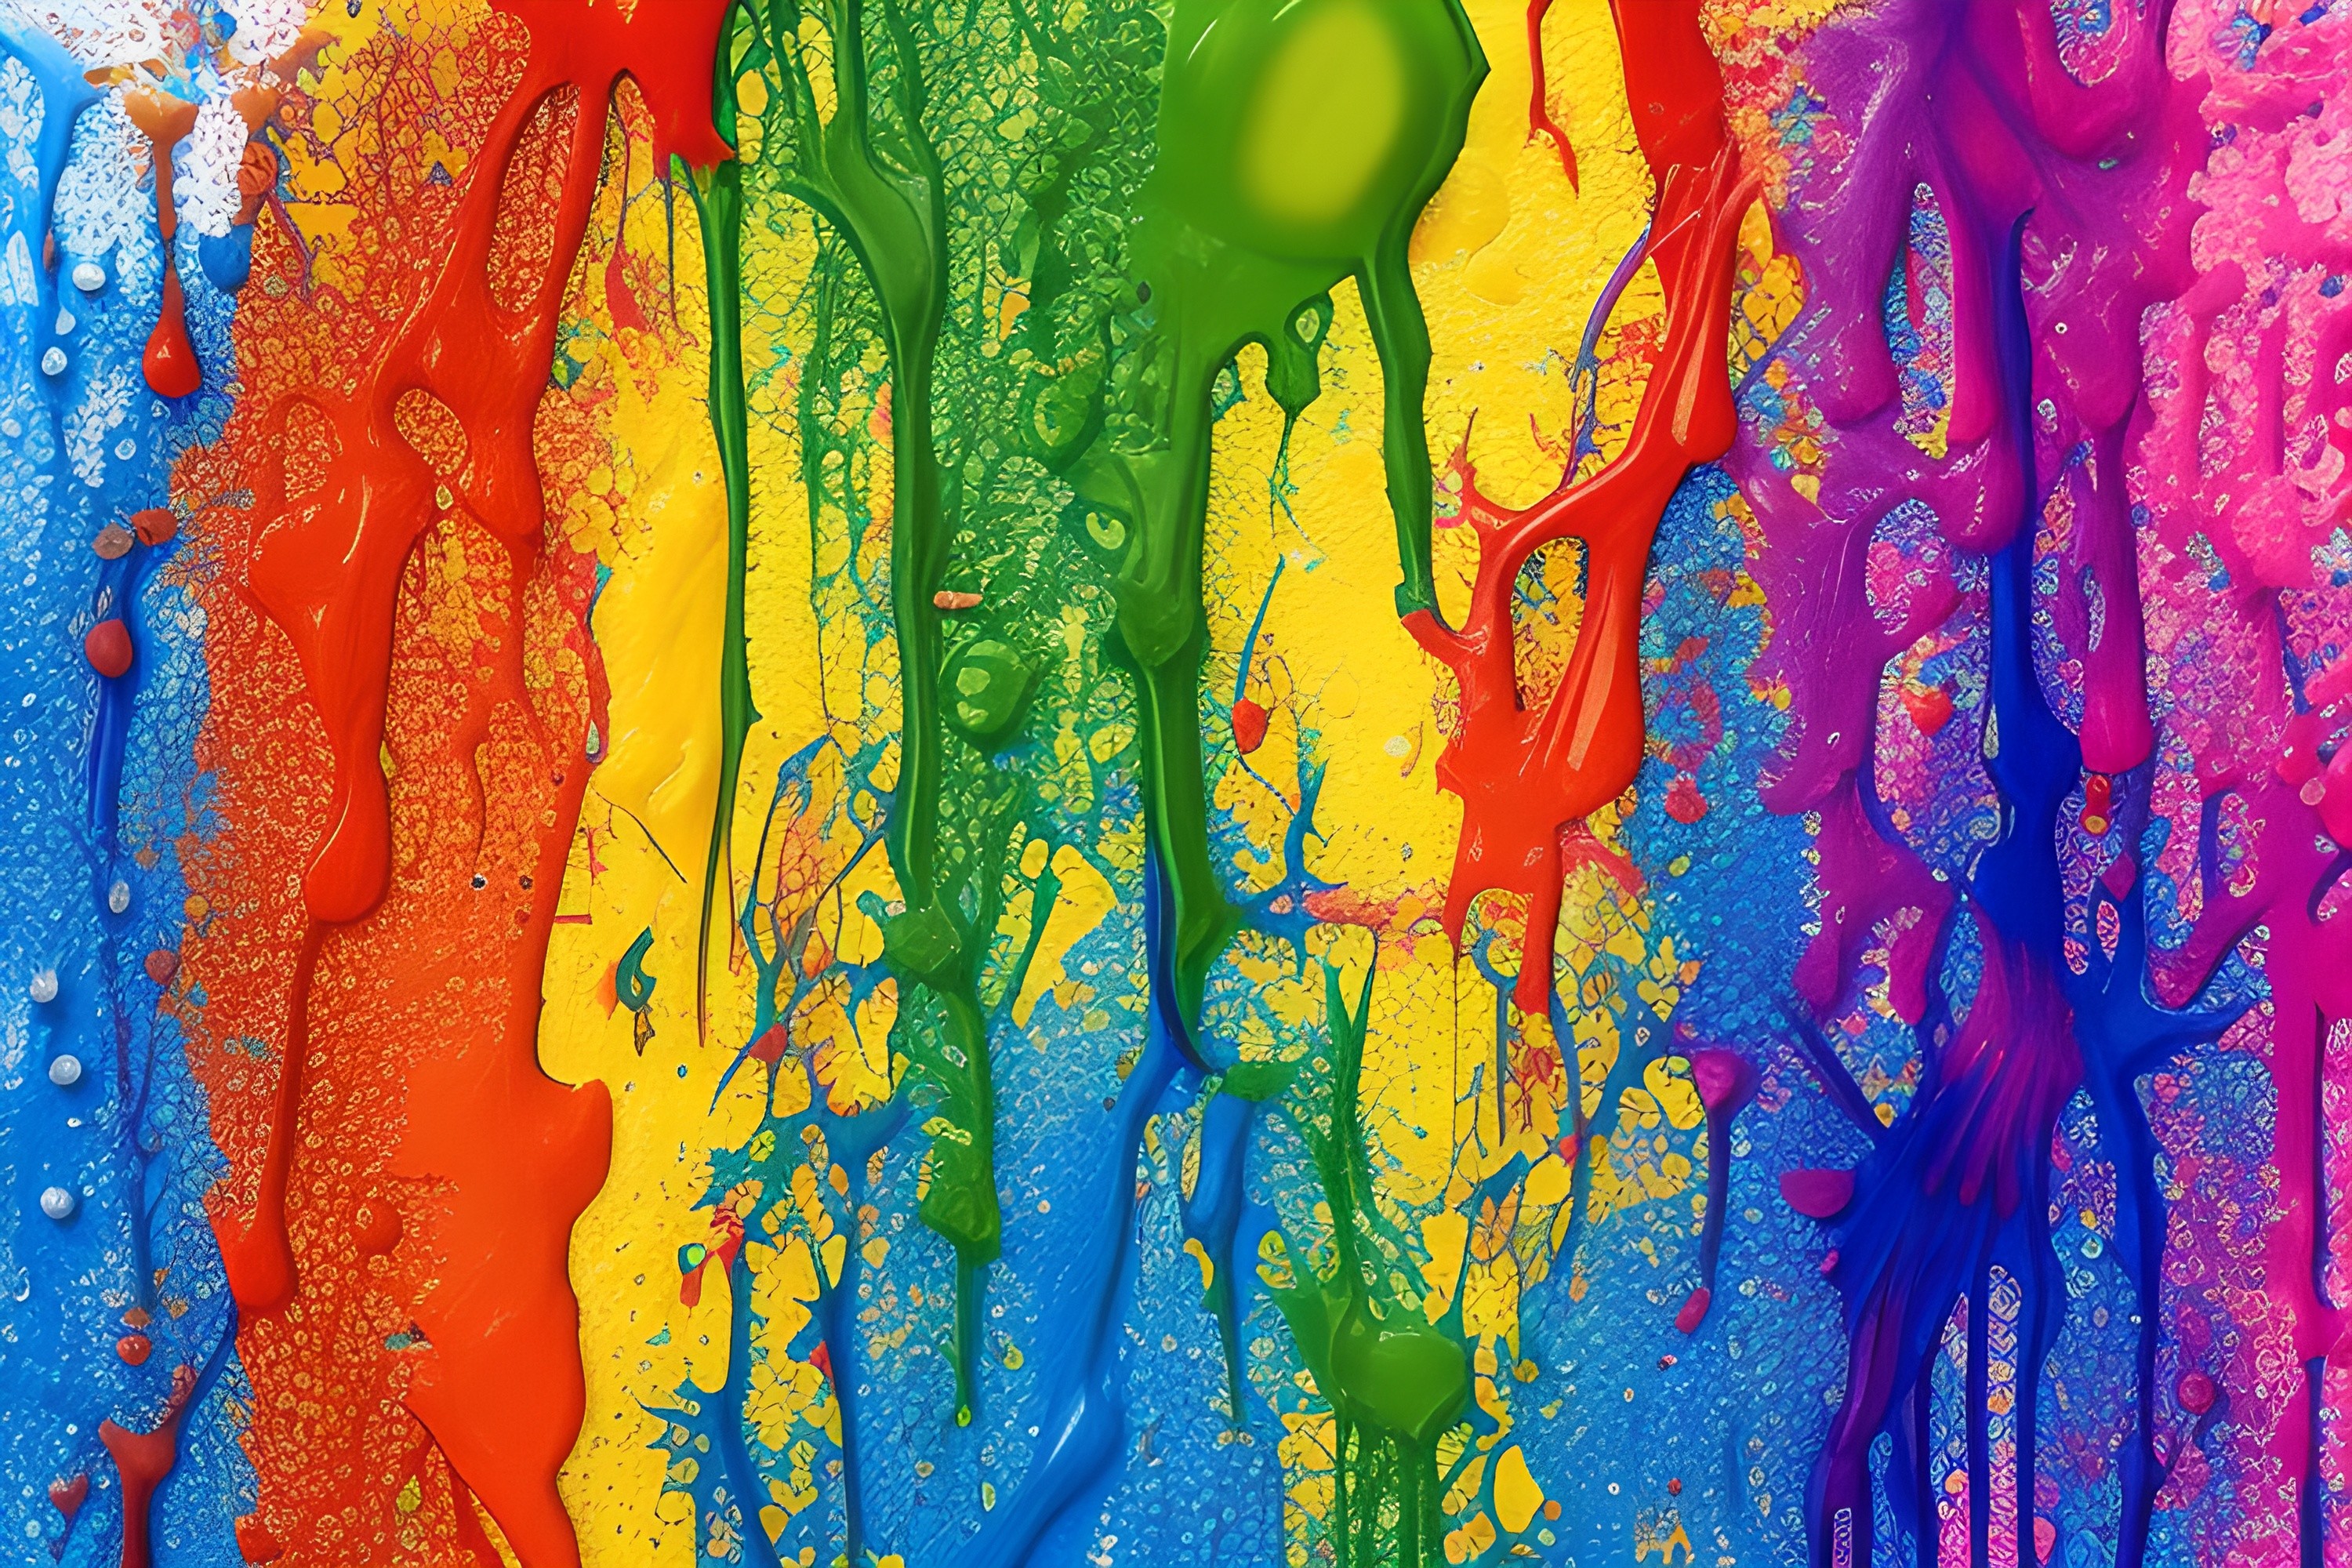 Colorful Dripping Paint Background Graphic by Craftable · Creative Fabrica